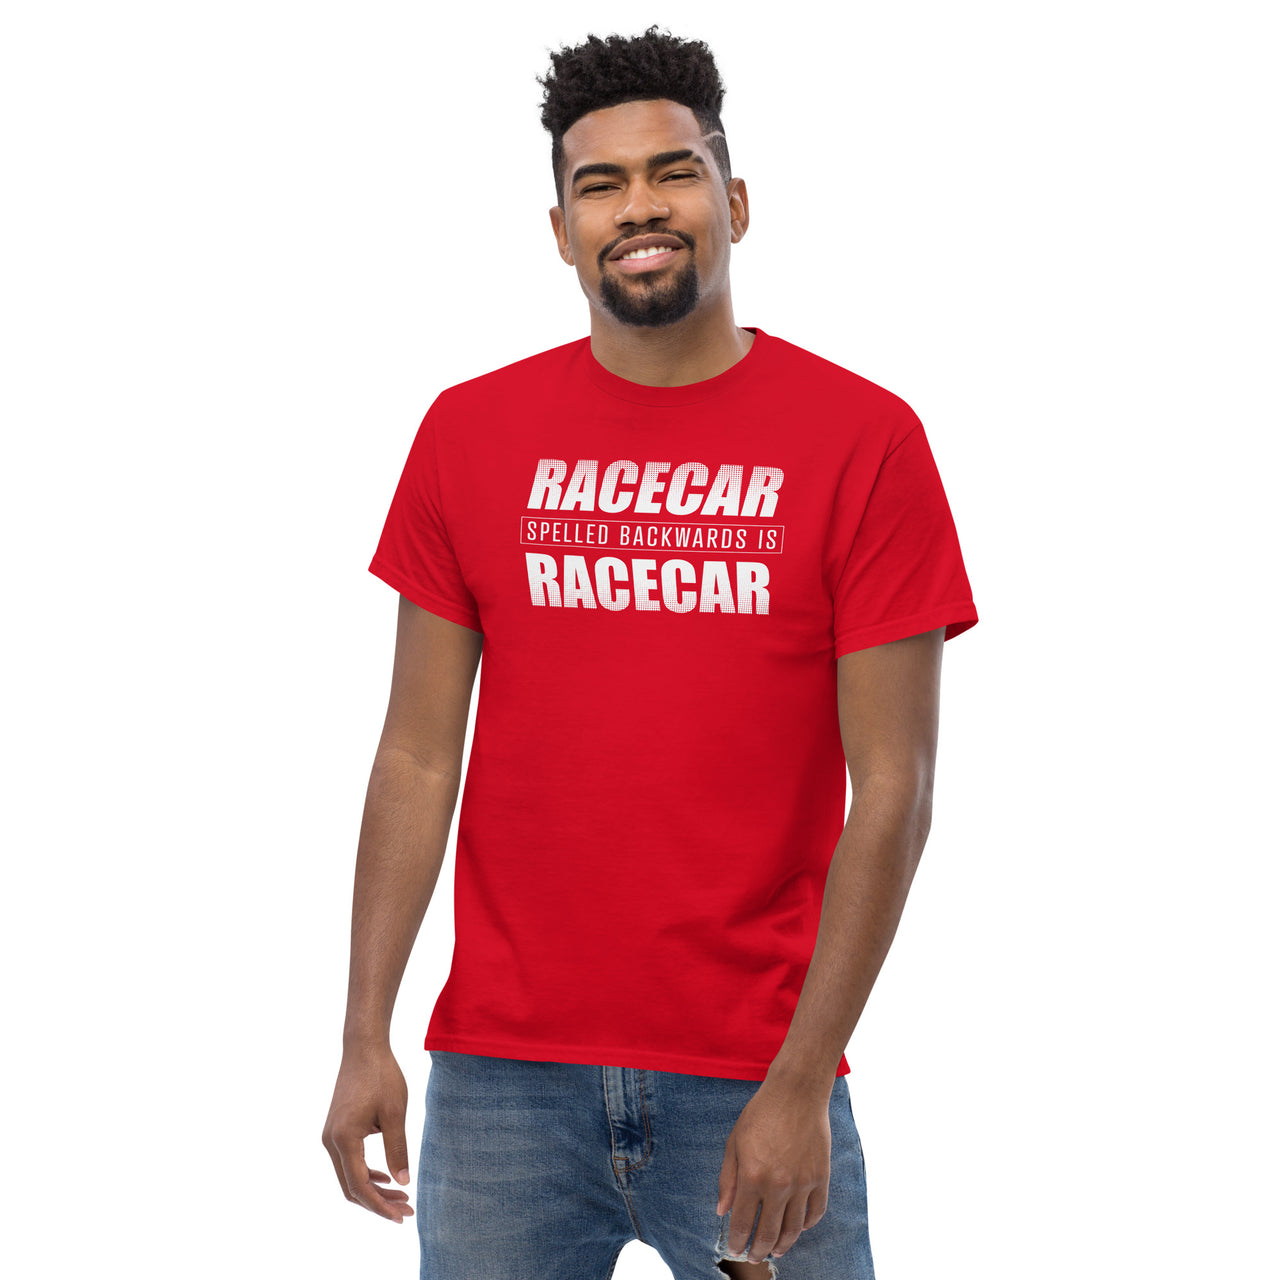 Funny Racecar Shirt, Car Enthusiast Gift, Drag Racing, or Racecar T-Shirt modeled in red